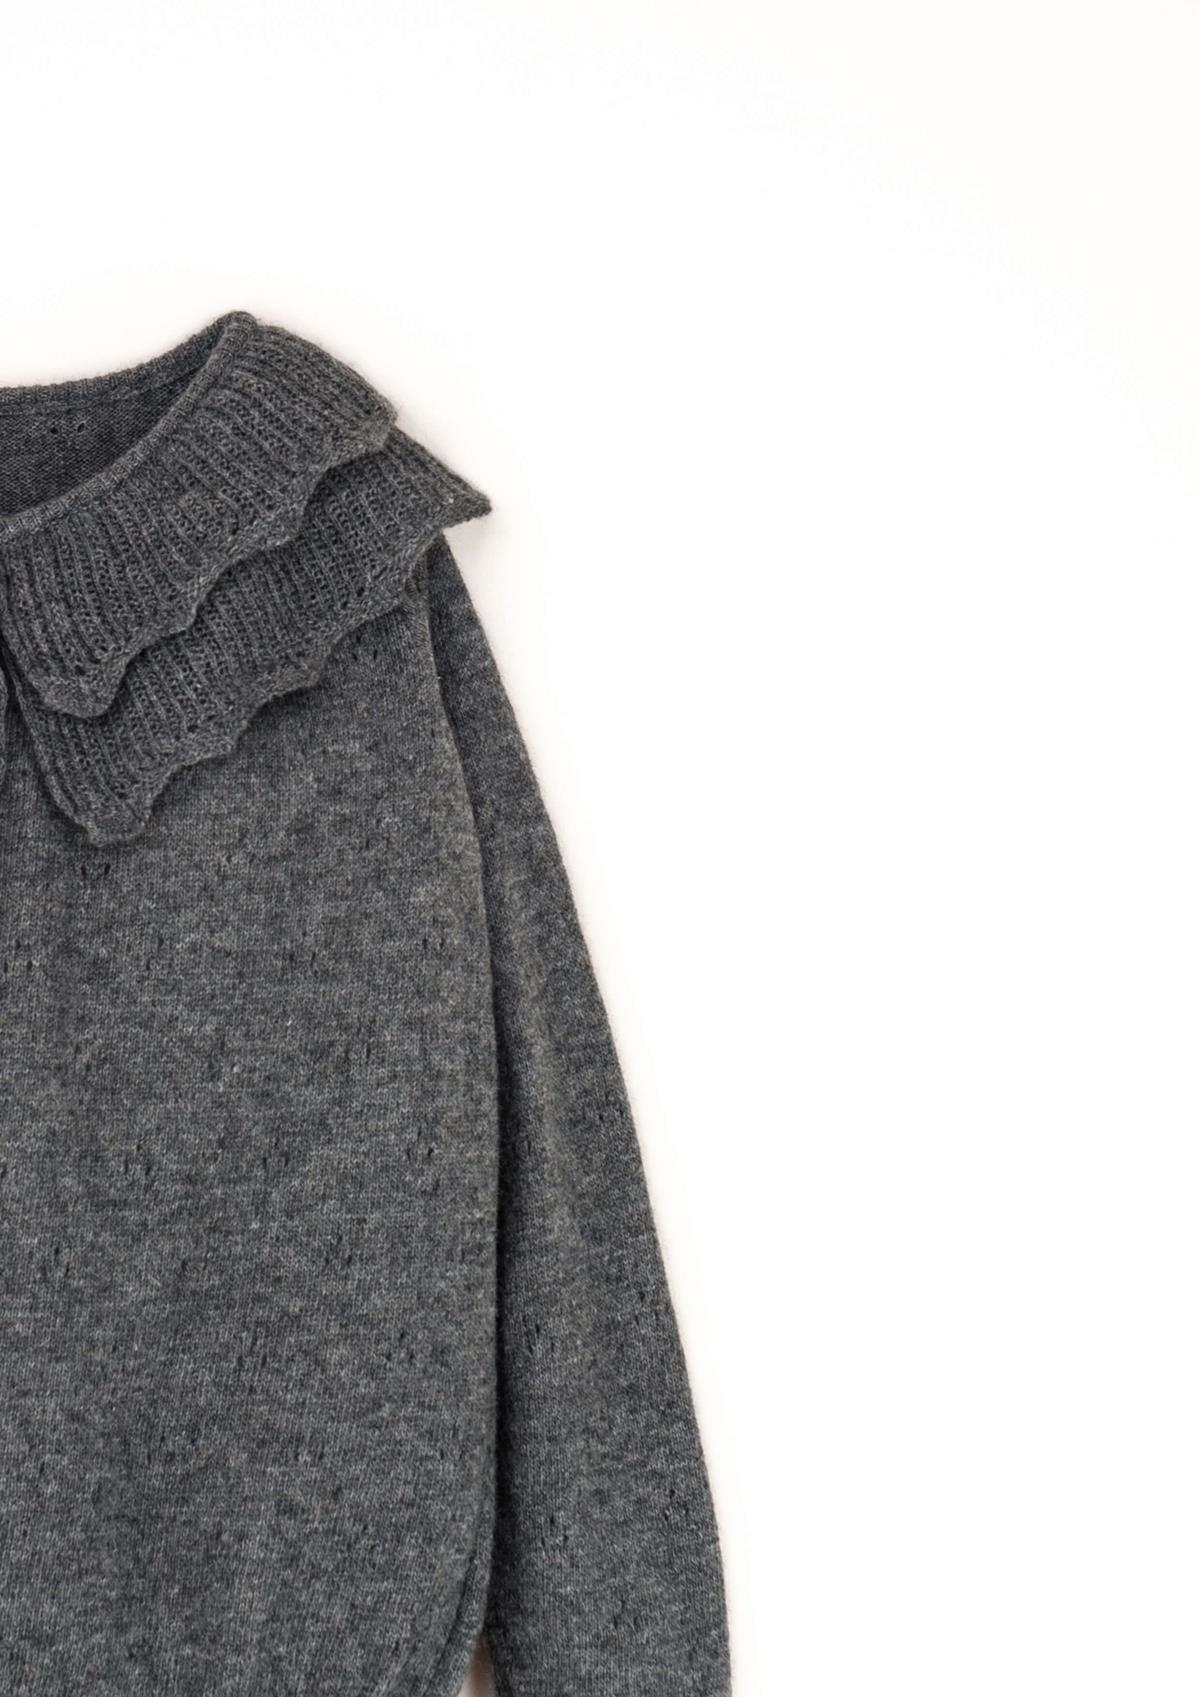 Mod.16.4 Grey knitted jersey with double frill collar | AW23.24 Mod.16.4 Grey knitted jersey with double frill collar